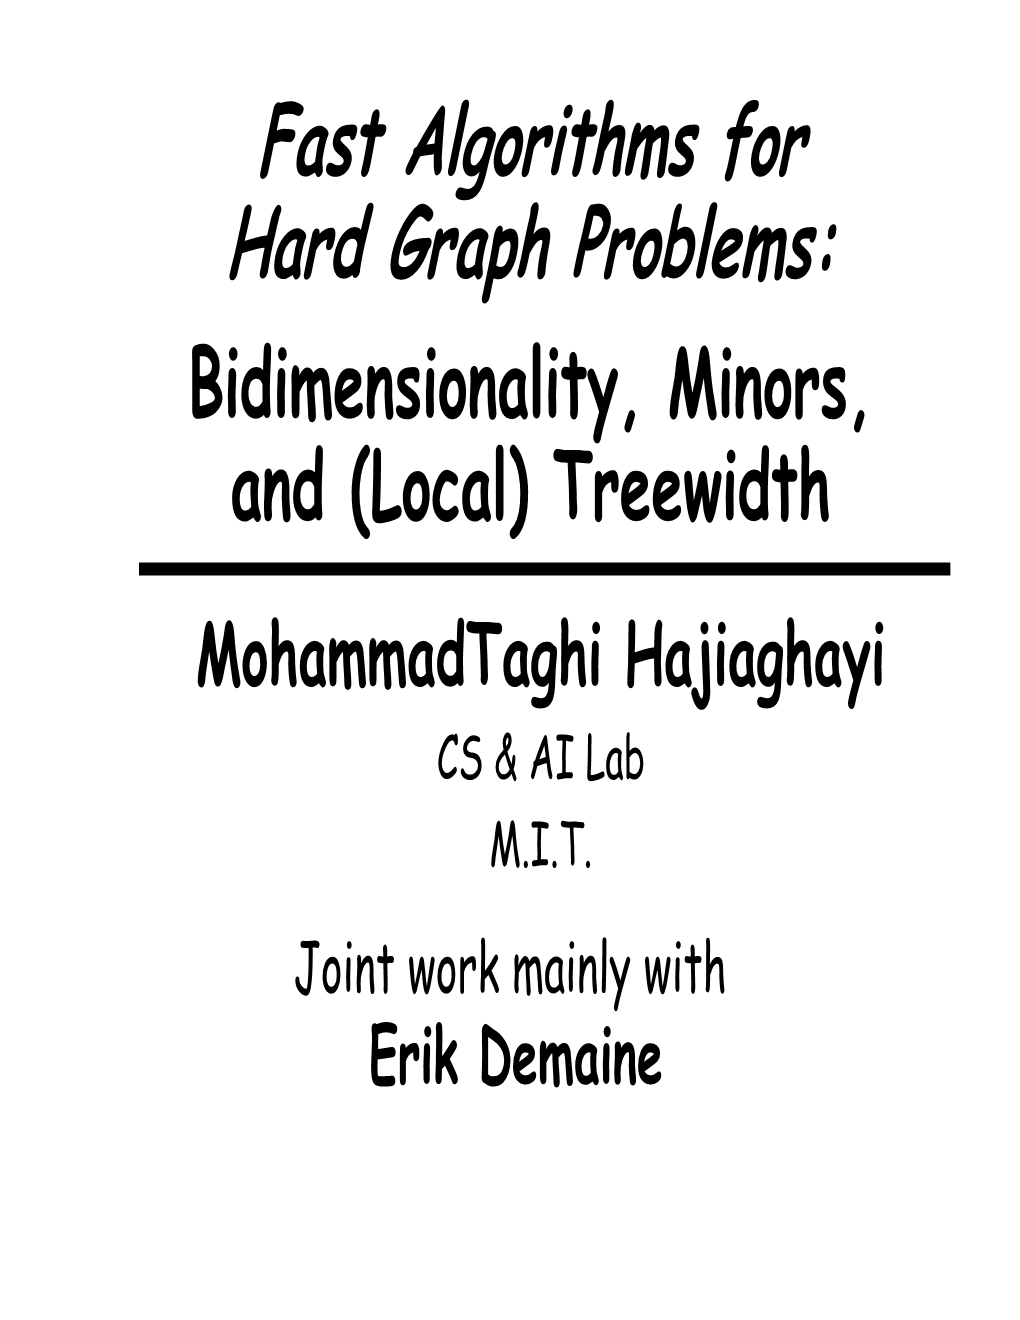 Fast Algorithms for Hard Graph Problems: Bidimensionality, Minors